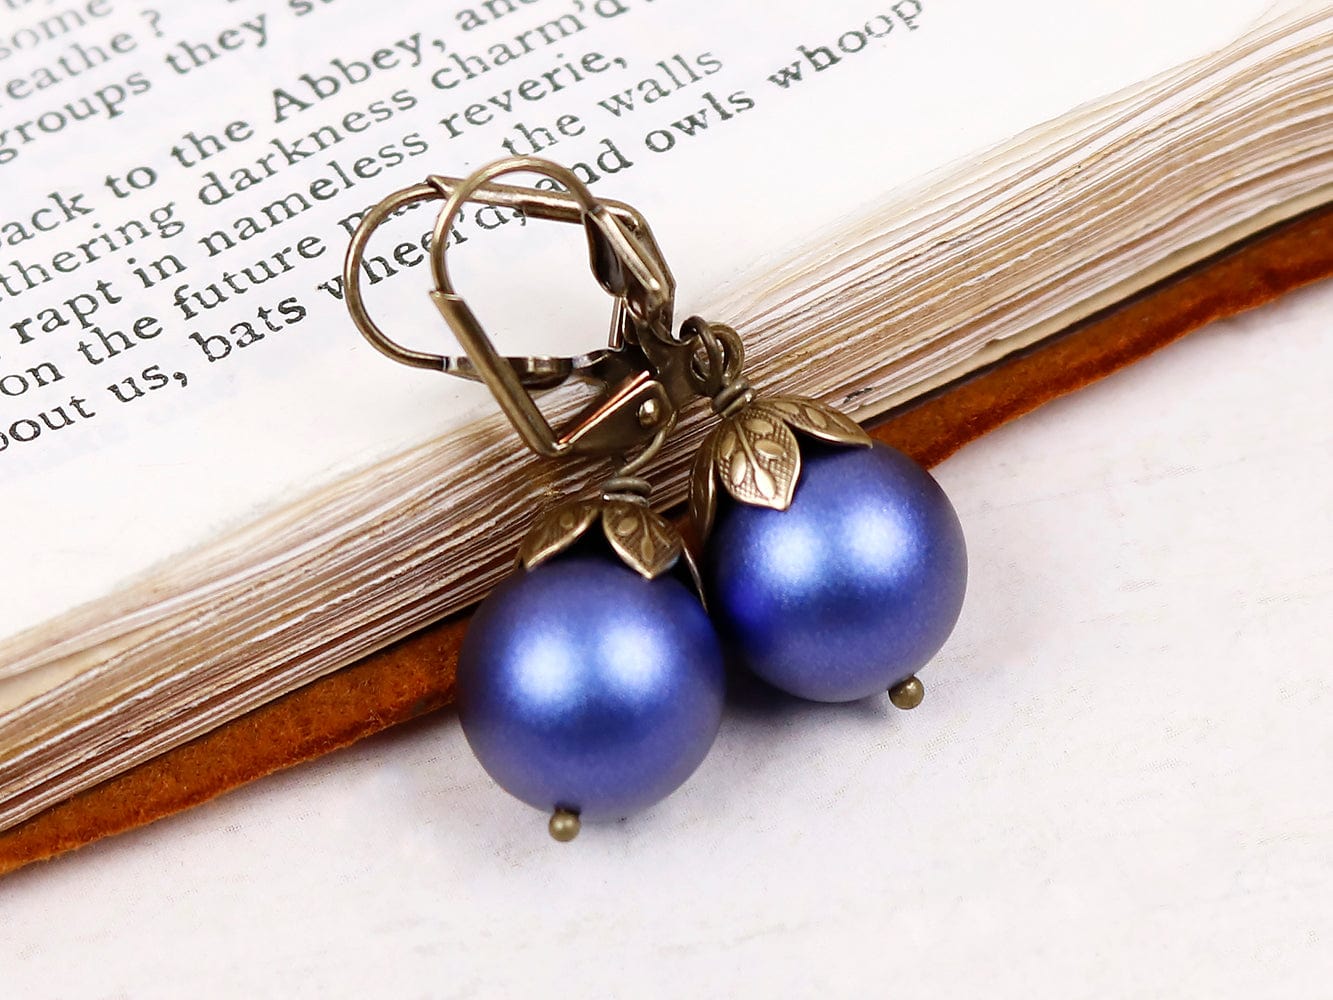 Aquitaine Pearl Drop Earrings in Iridescent Dark Blue Pearl and Antiqued Brass by Rabbitwood and Reason